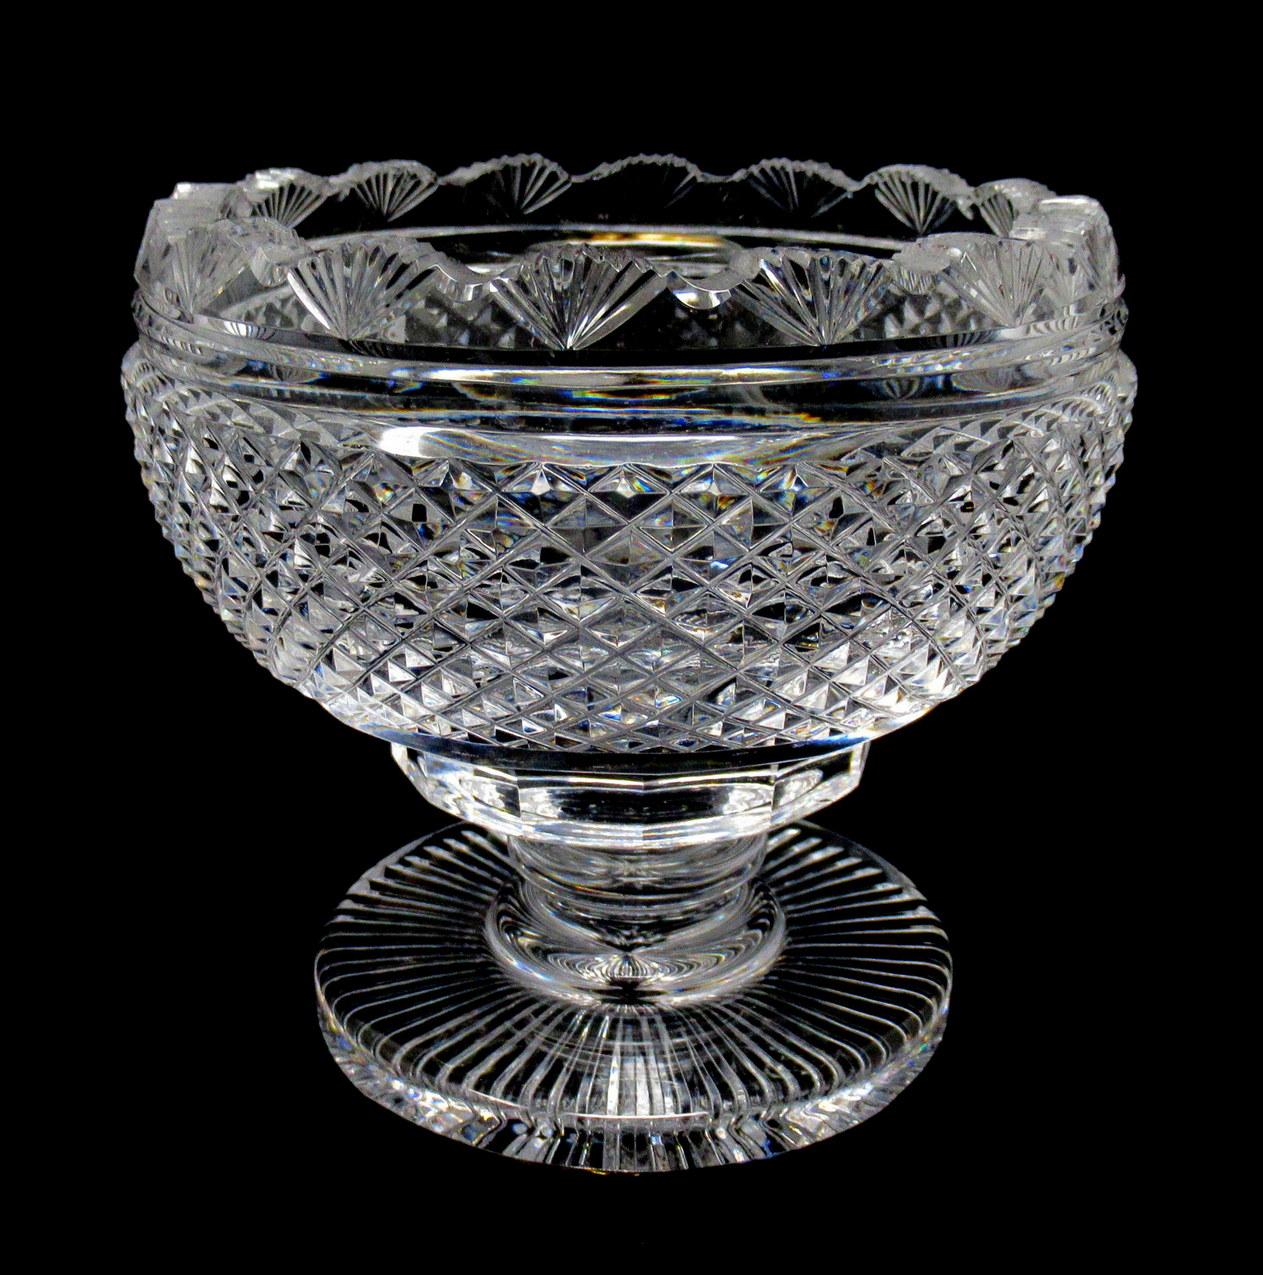 Stunning and extremely rare Georgian Irish Heavy Gauge hand cut crystal fruit bowl or centerpiece of traditional outline, of outstanding quality and condition. Circa 1800 - 1825. 

The unusual fan-cut decorative rim above a deep cut diamond